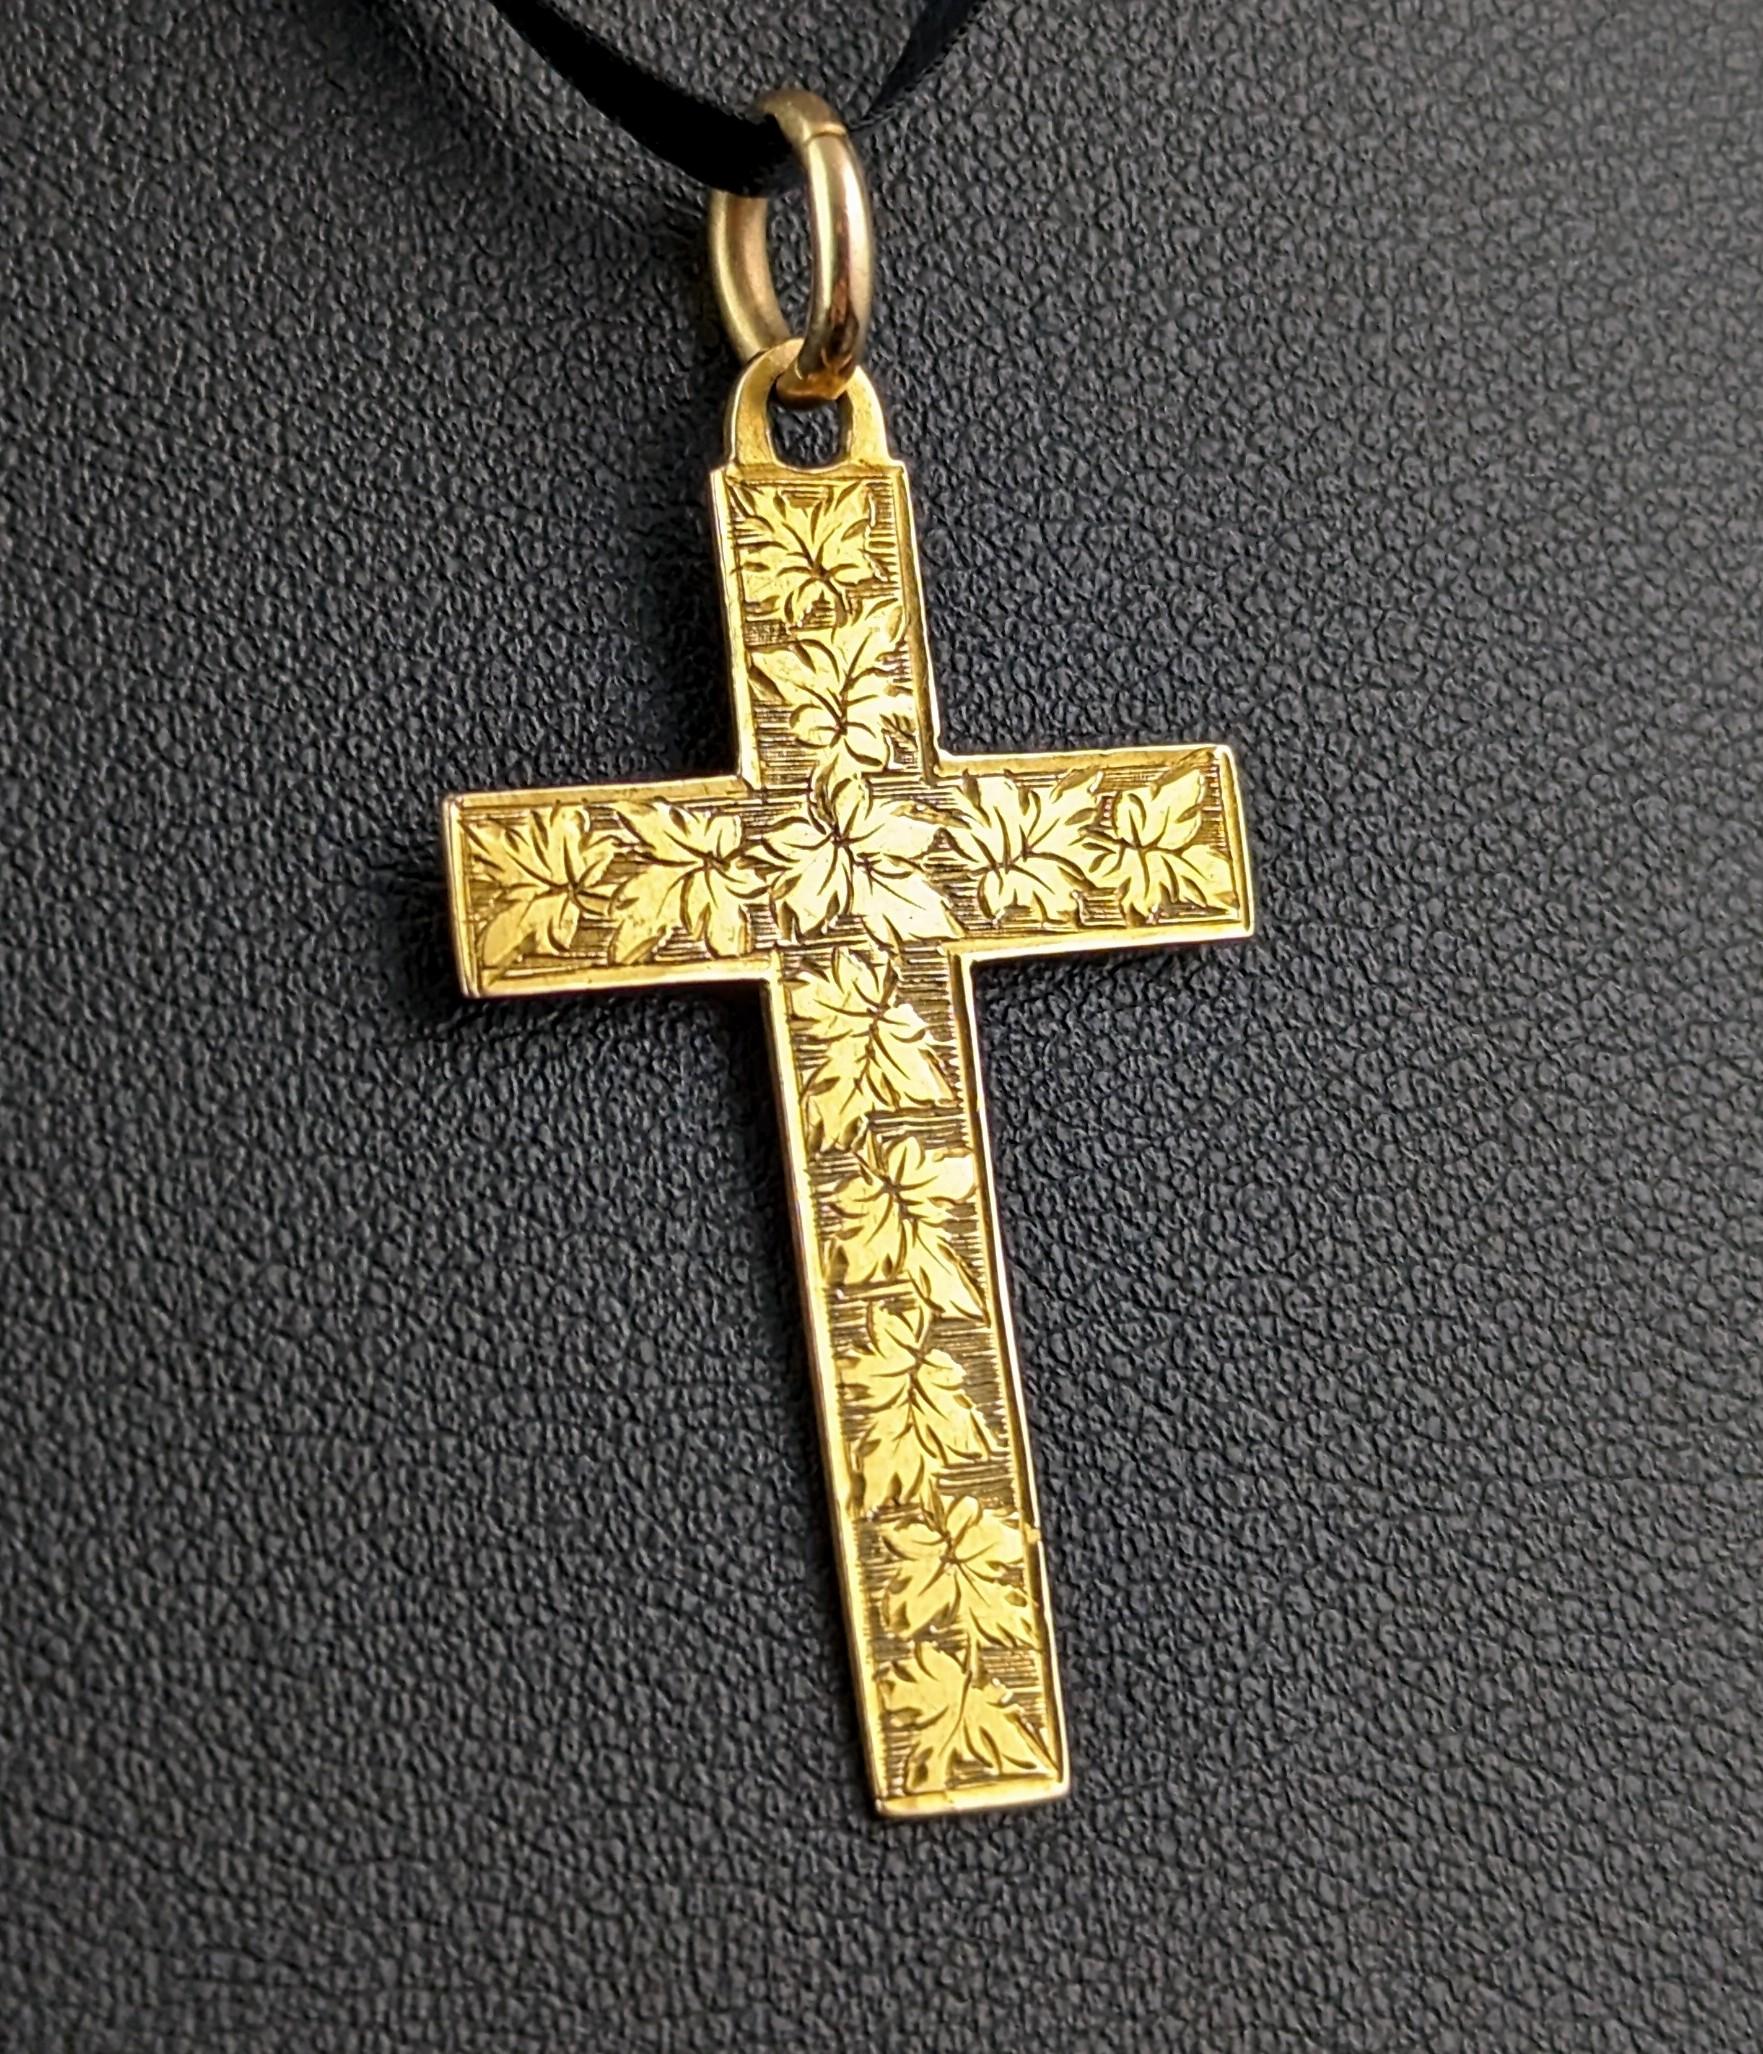 A gorgeous antique 9ct gold cross pendant.

It is a medium sized cross, lightweight and easy to wear with a beautifully engraved front and smooth polished back.

This attractive hand cut antique gold cross would be the perfect addition to your